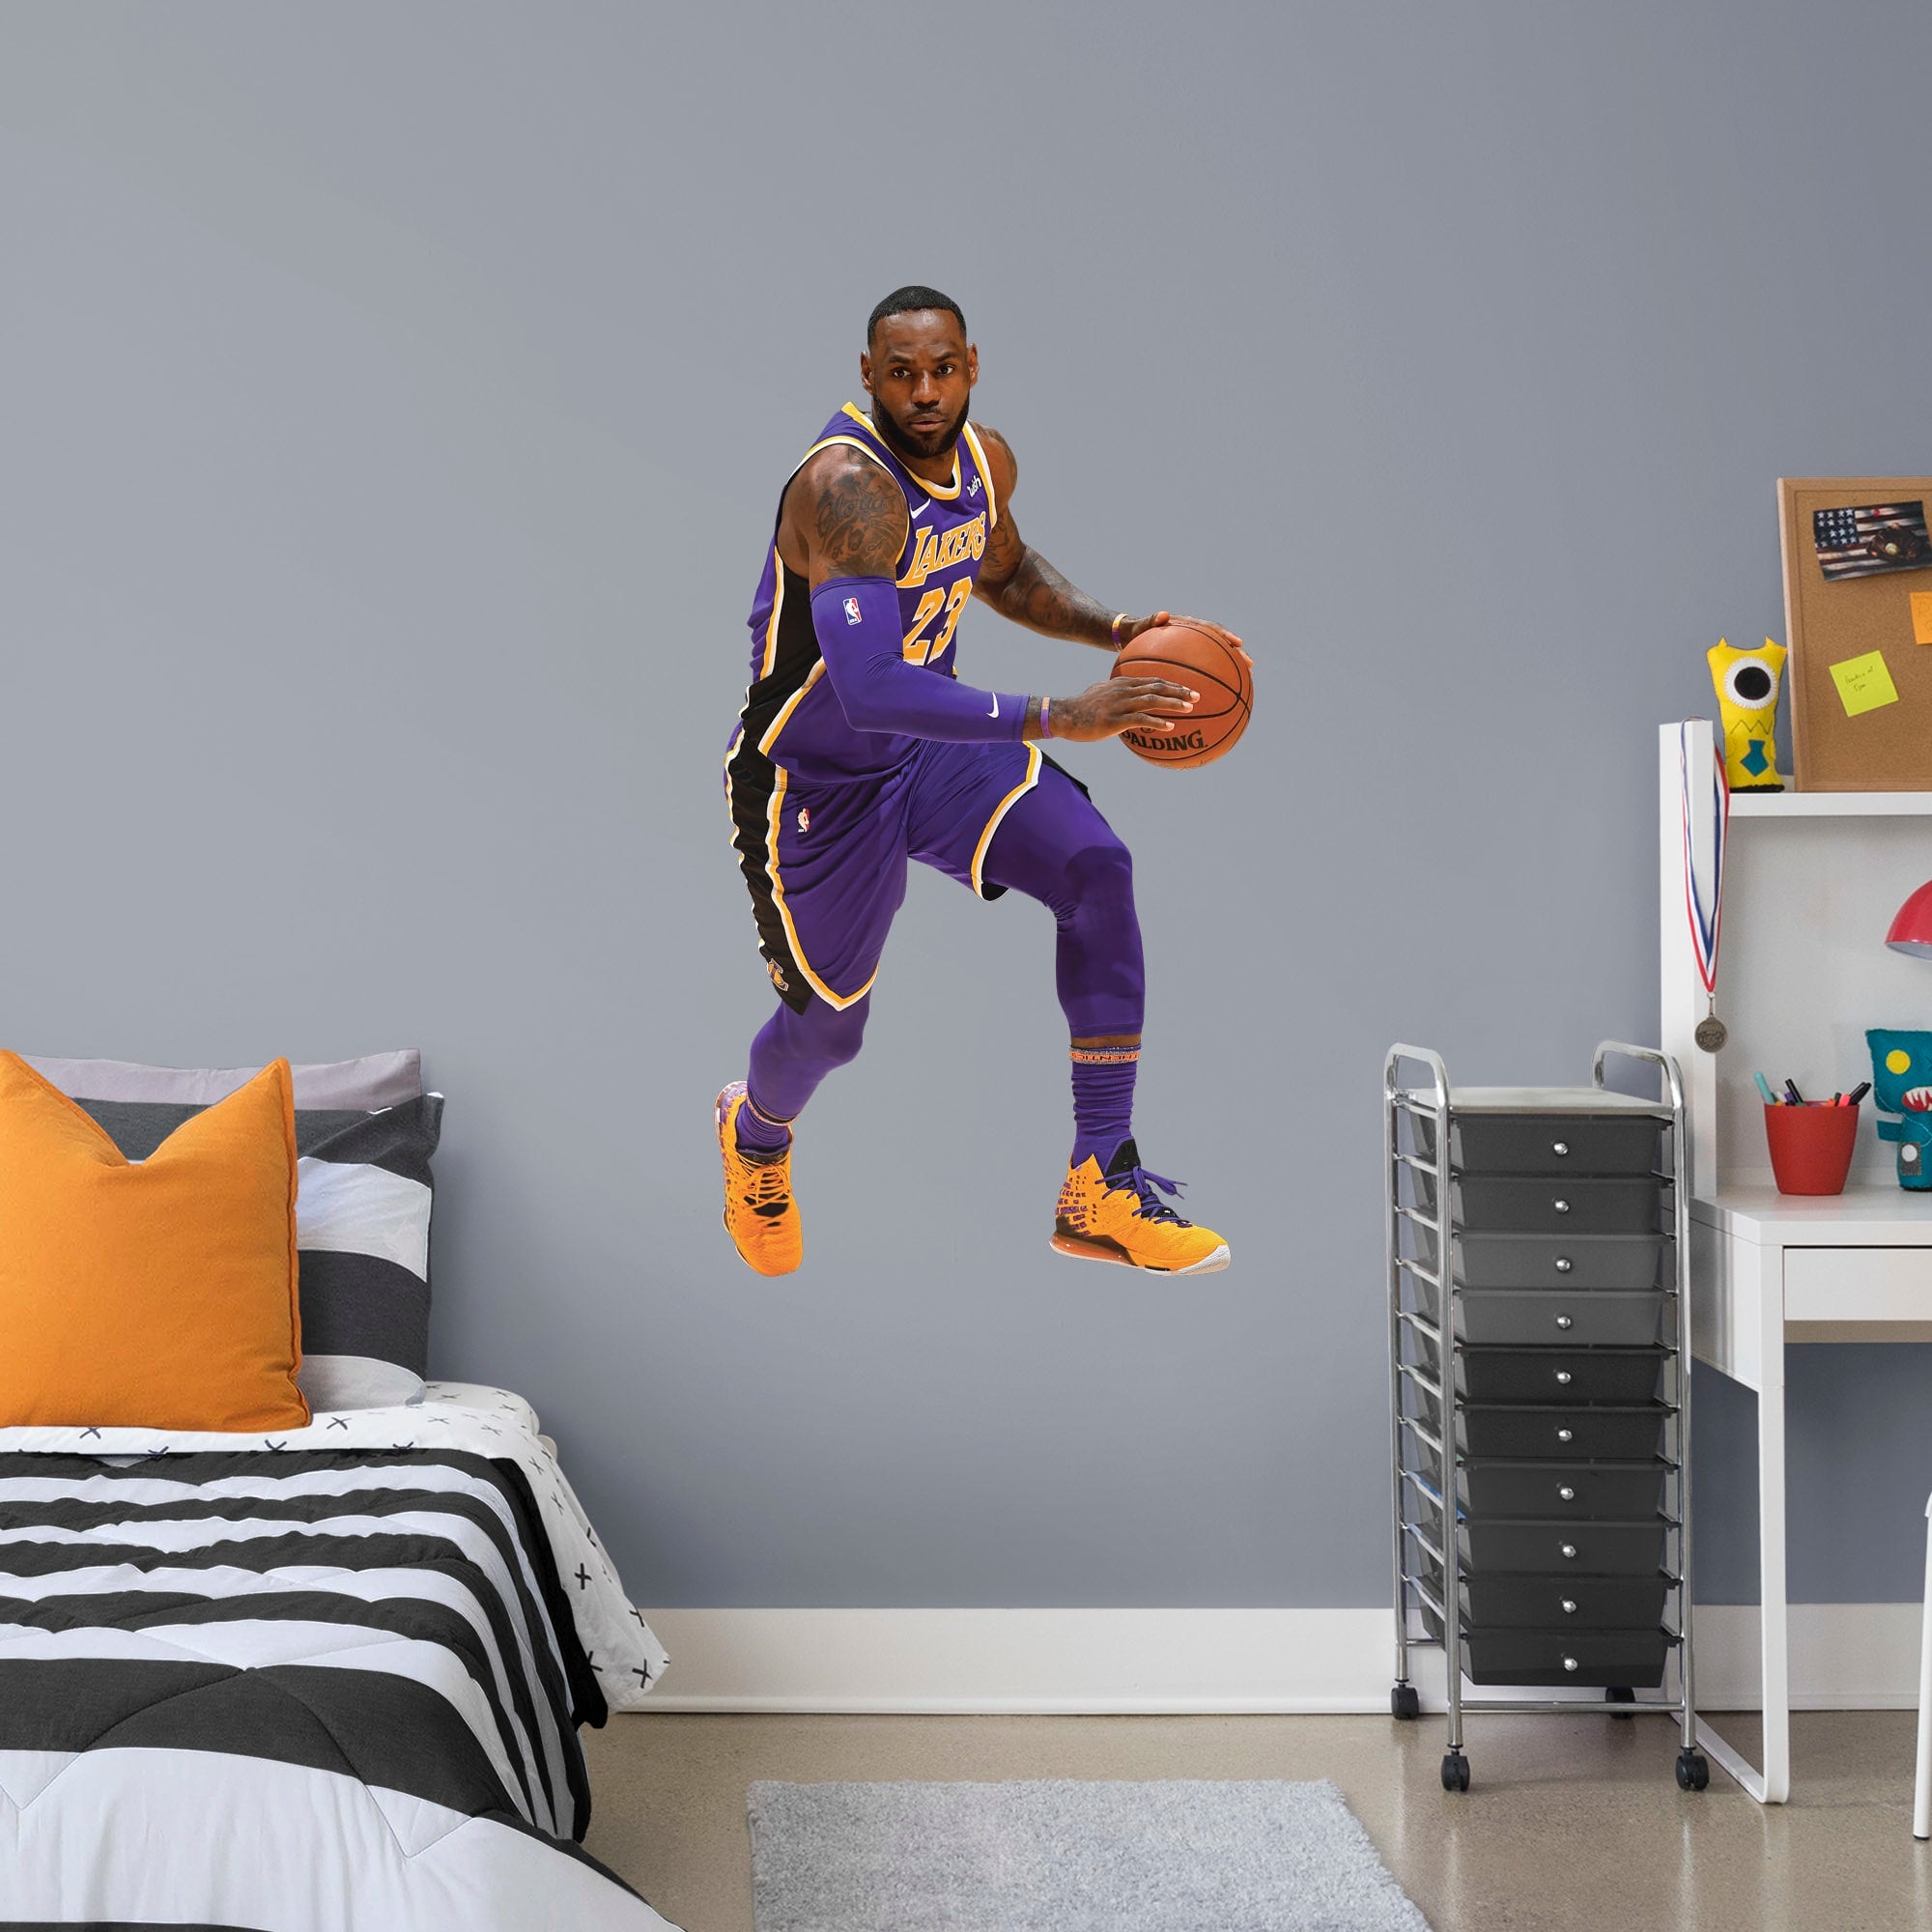 LeBron James for Los Angeles Lakers: Statement Jersey - Officially Licensed NBA Removable Wall Decal Giant Athlete + 2 Decals (2